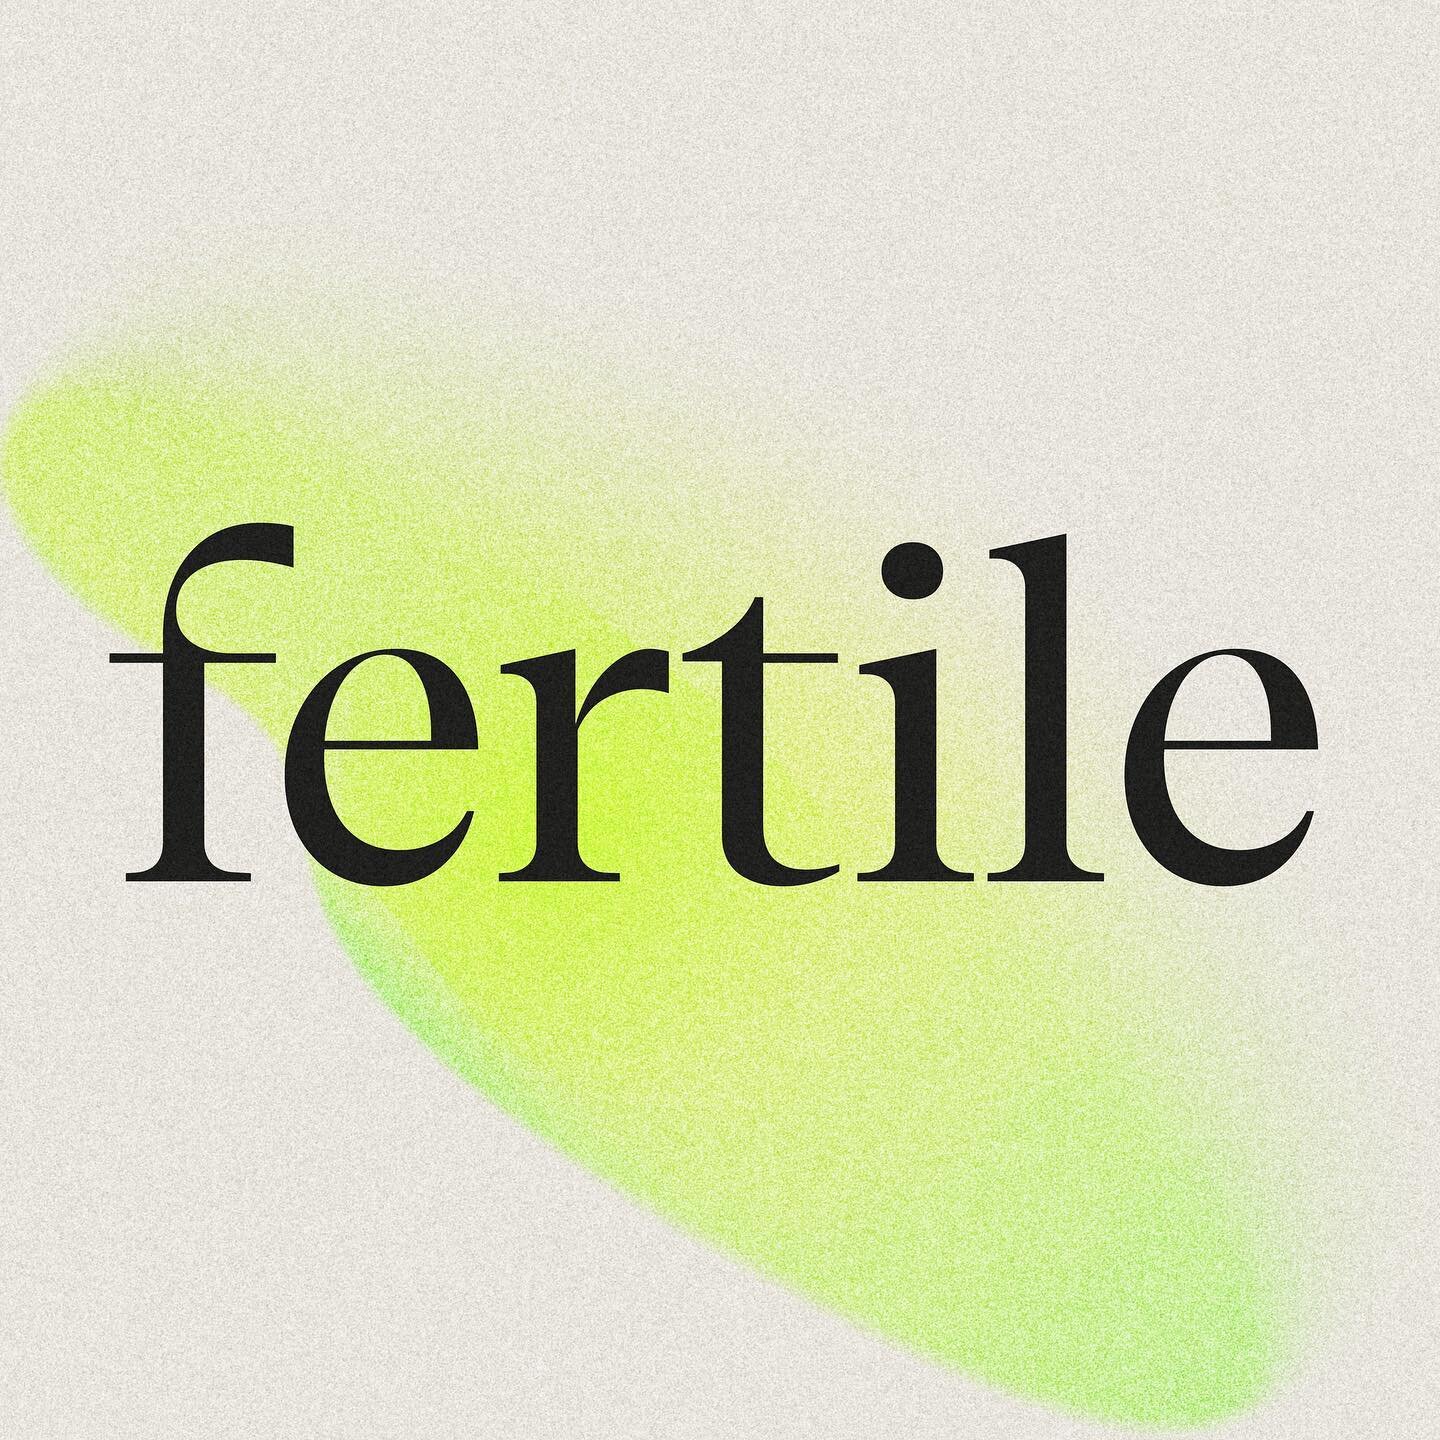 Last year I also had the pleasure to create the branding for the ecological art project @fertile__ 

Here is a little snapshot of the research and process to create this identity. The name of the association comes from a poem by Eluard and the gradie